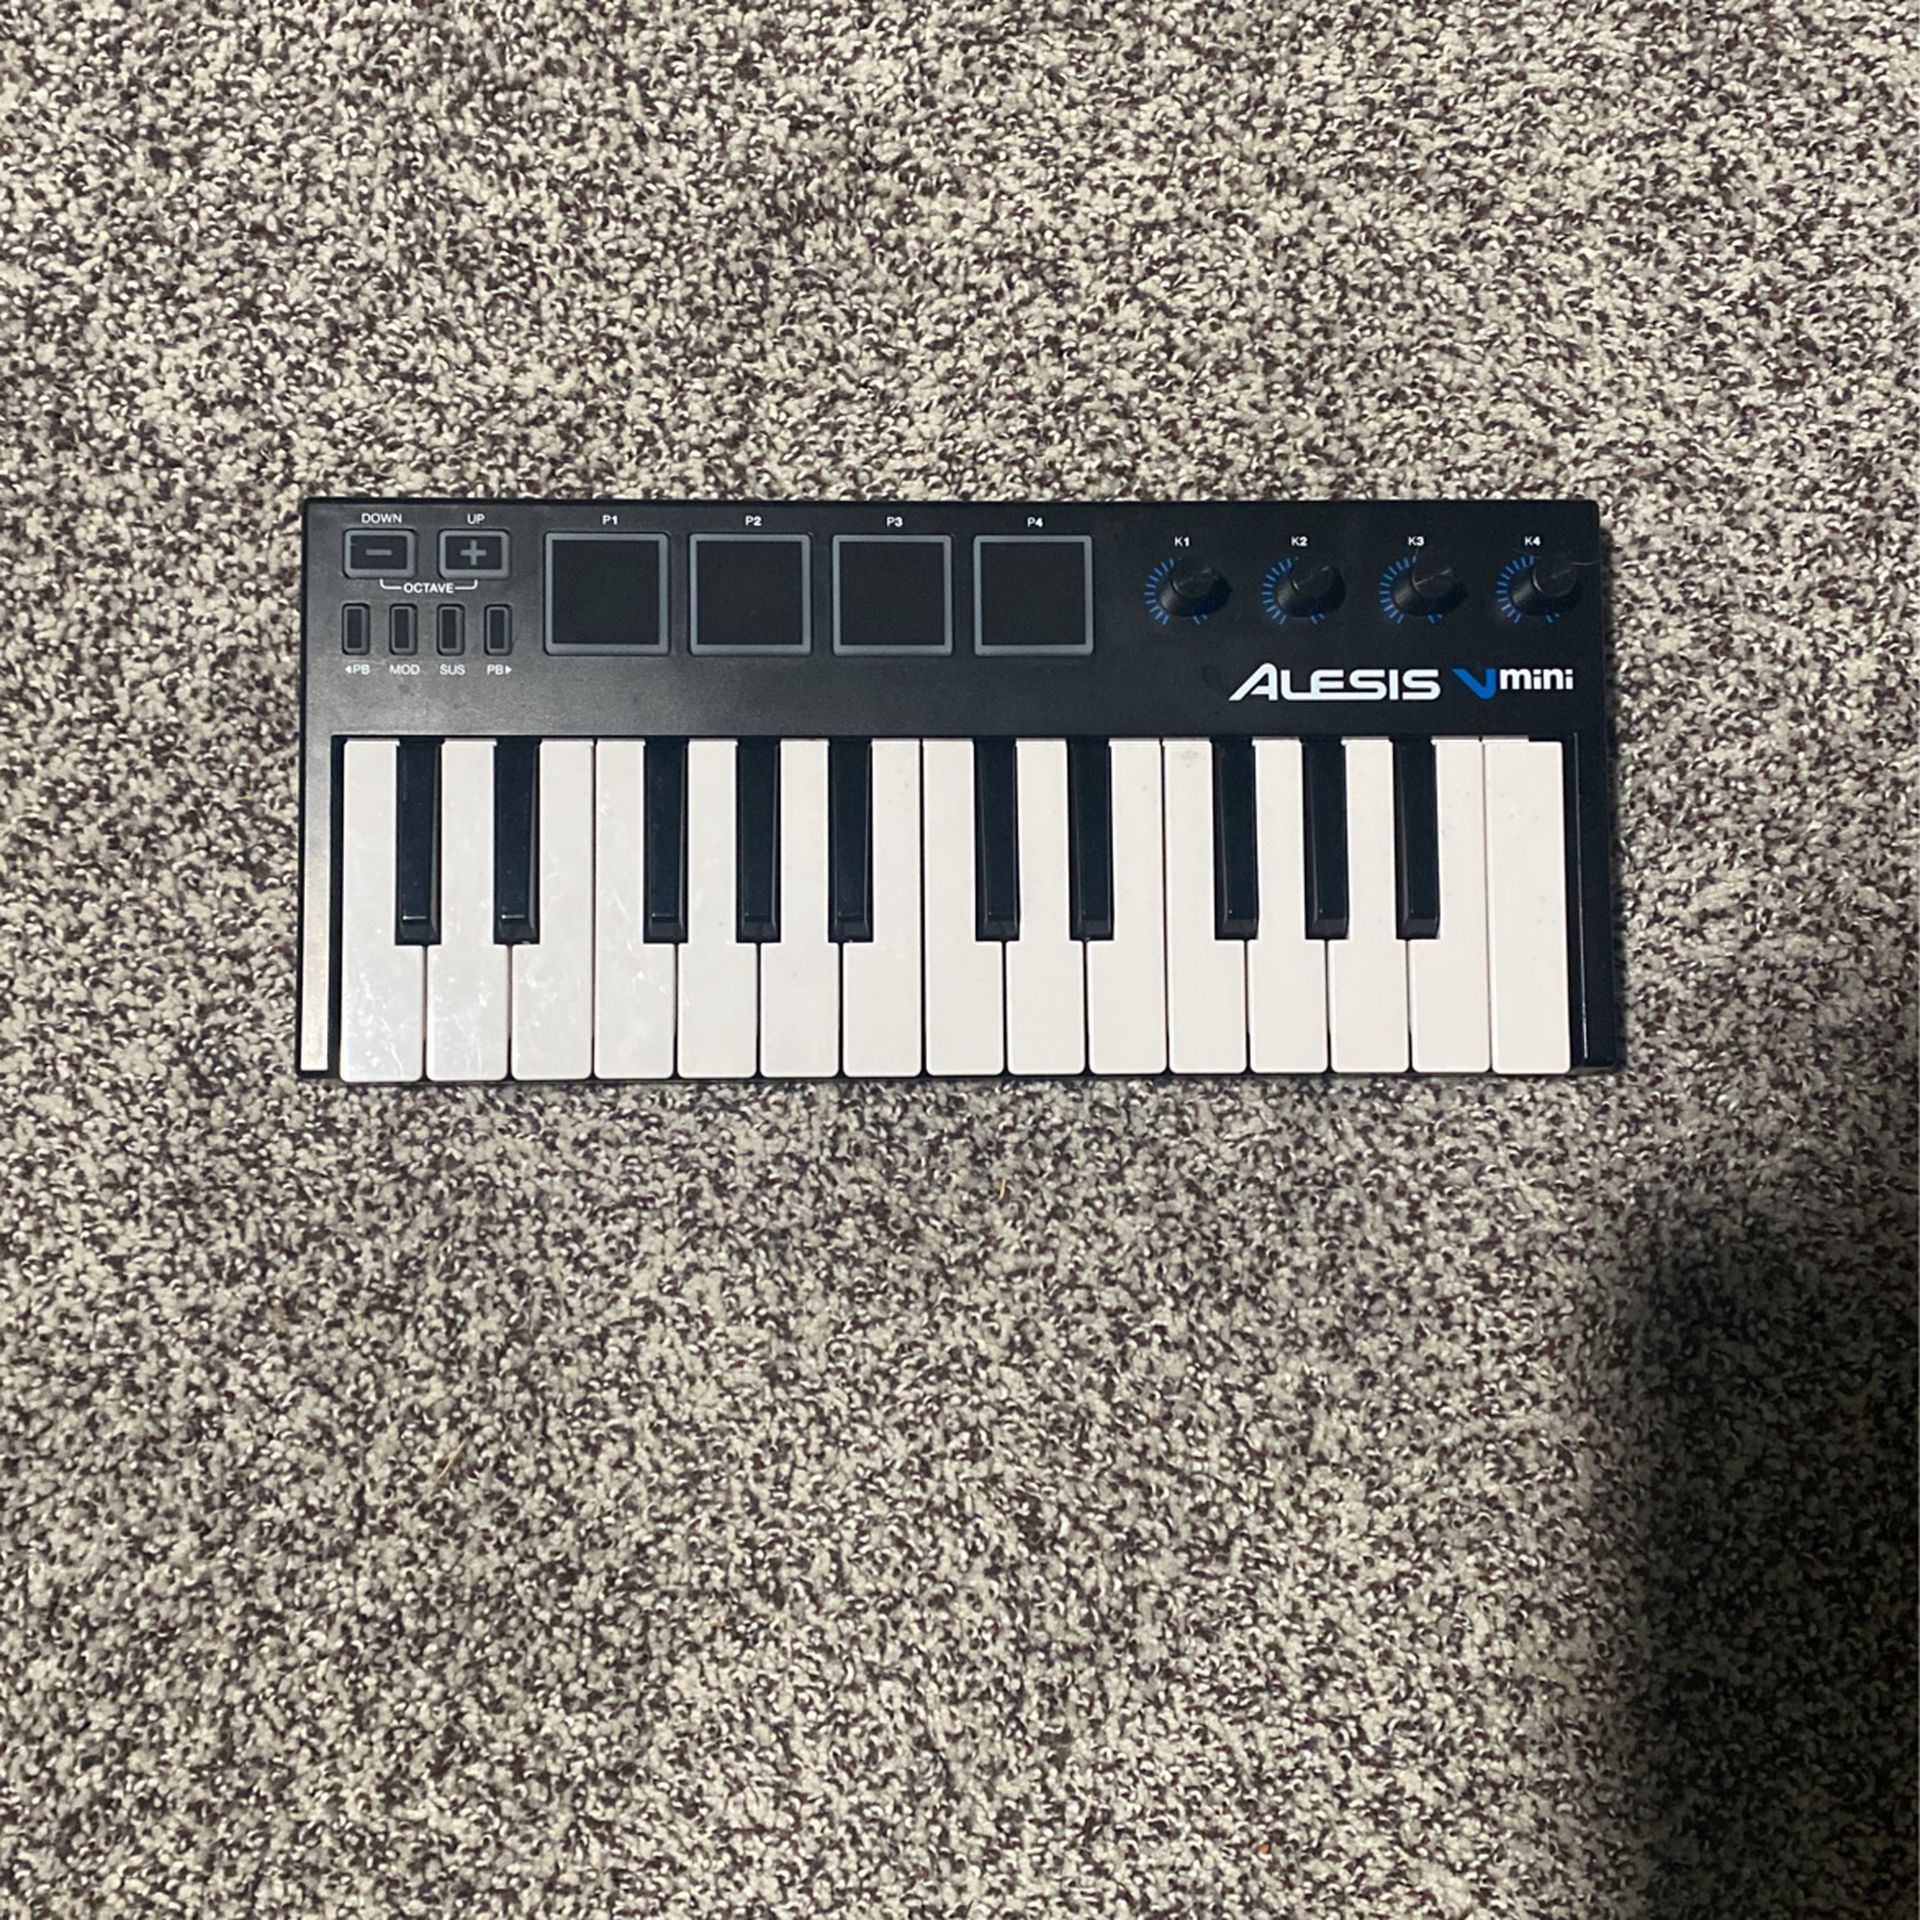 Alesis Vmini small keyboard for music